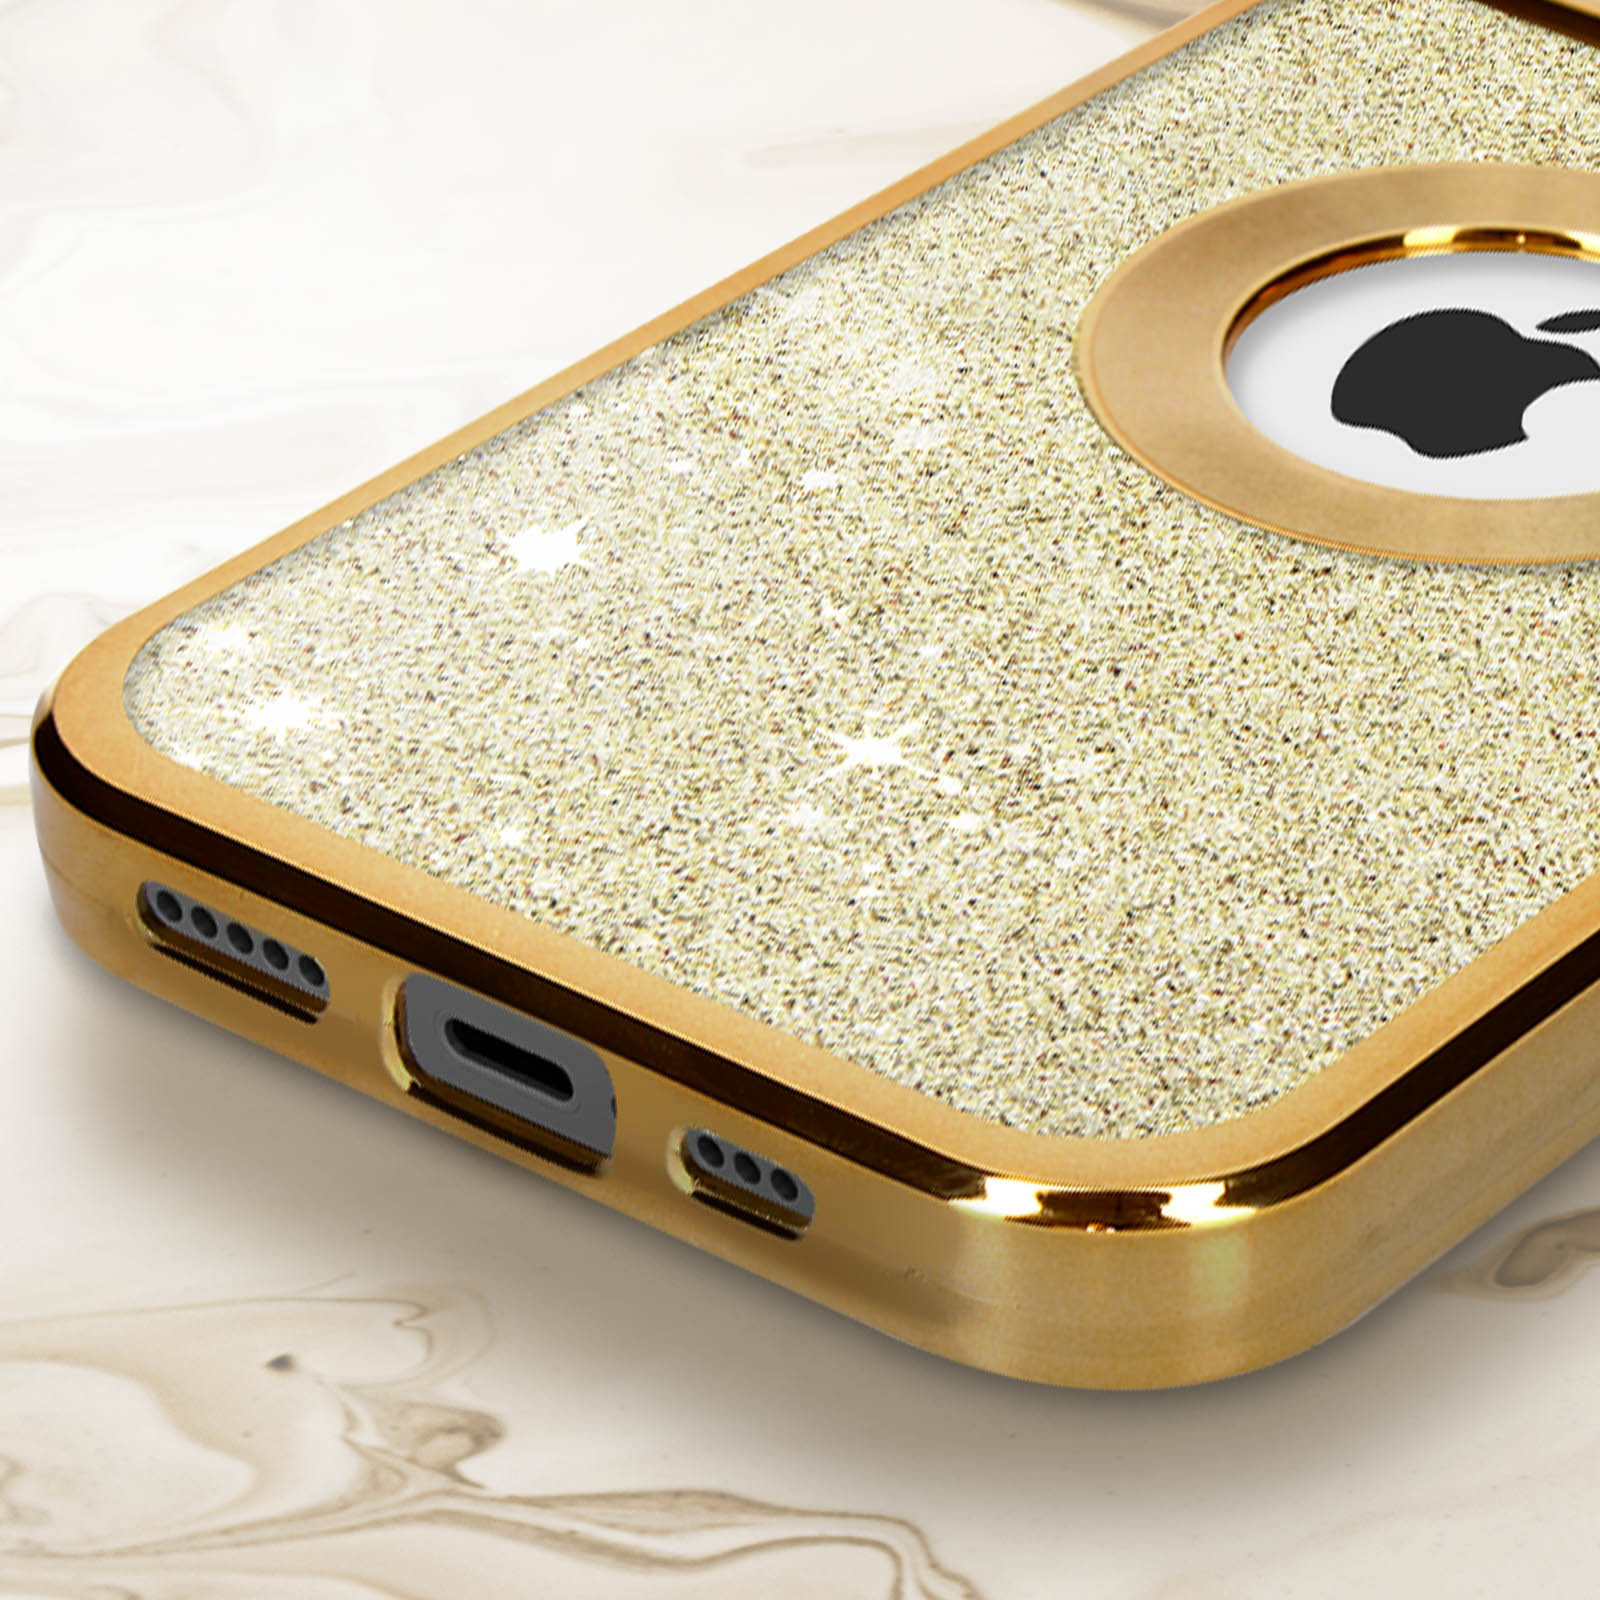 Max, Protecam Pro iPhone Spark 12 Apple, Gold AVIZAR Series, Backcover,